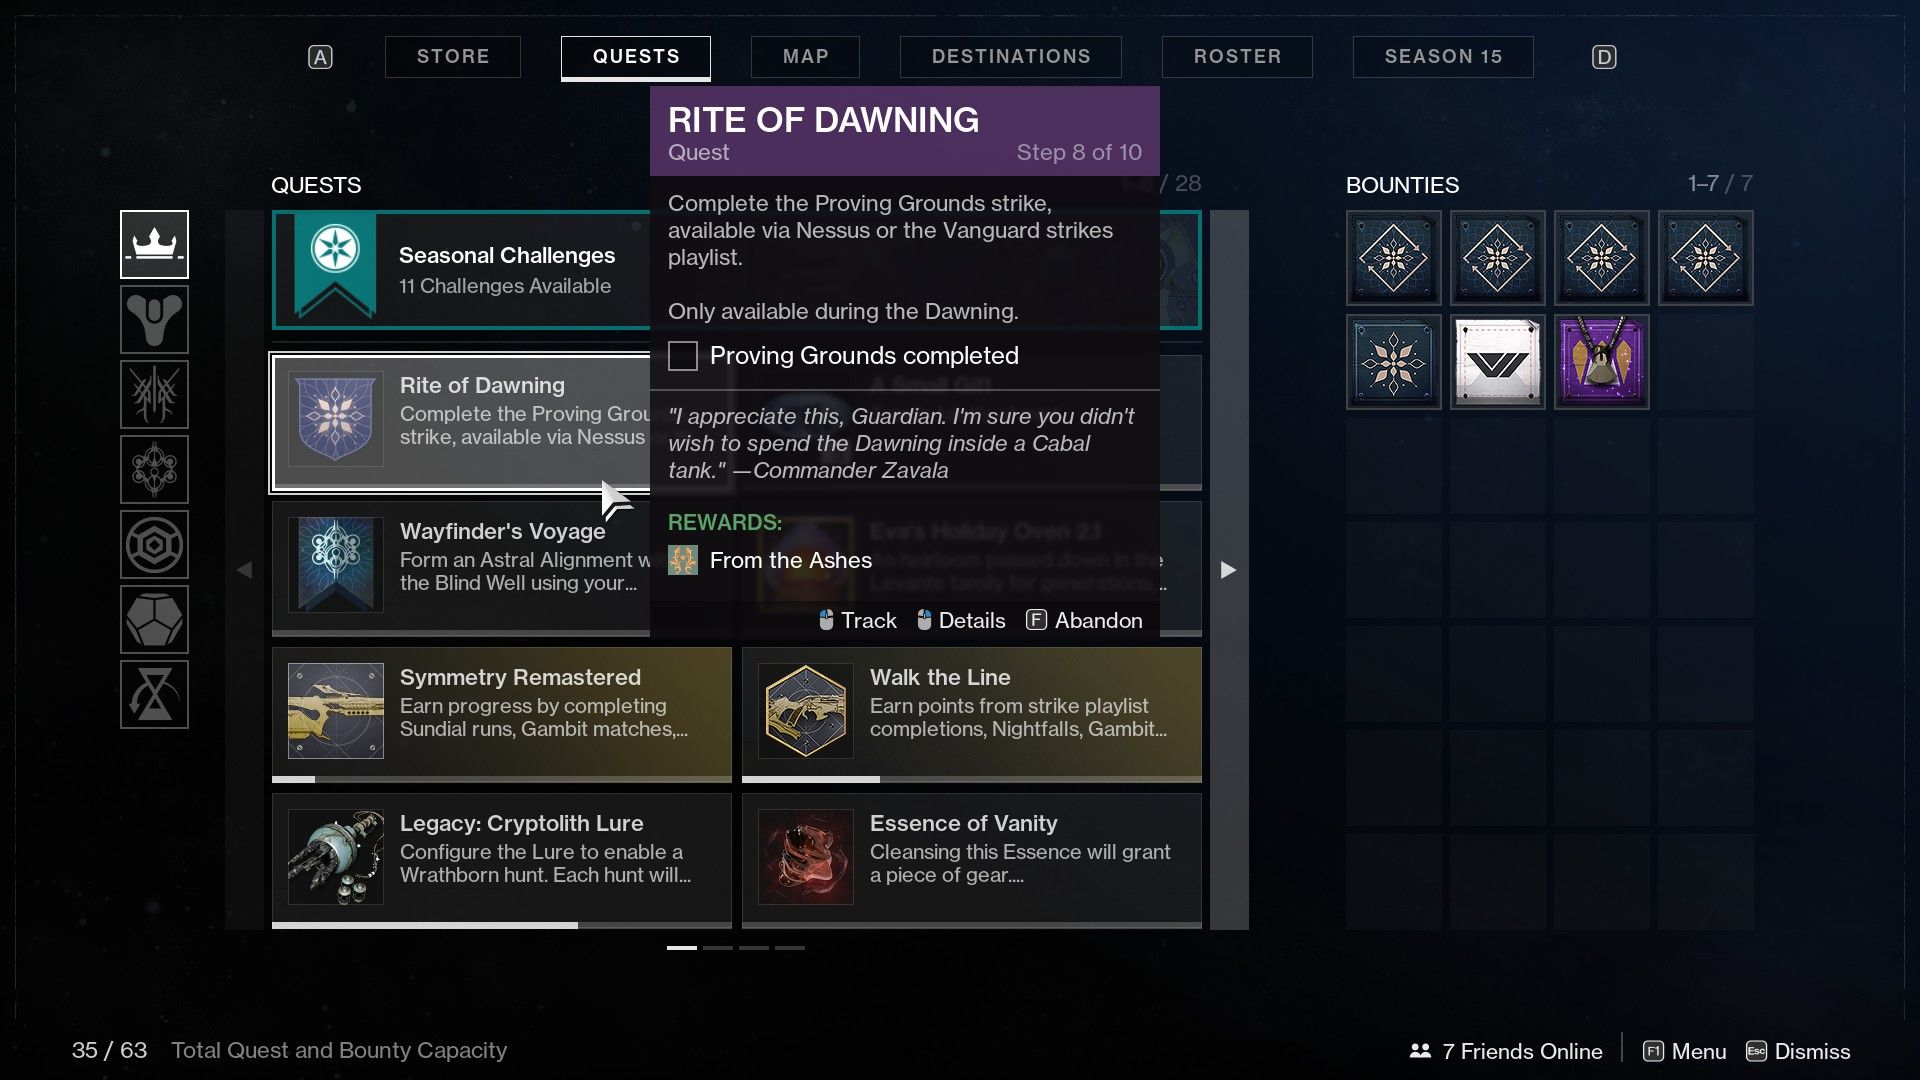 Destiny 2 Dawning 2021: How to Complete the Rite of Dawning Quest